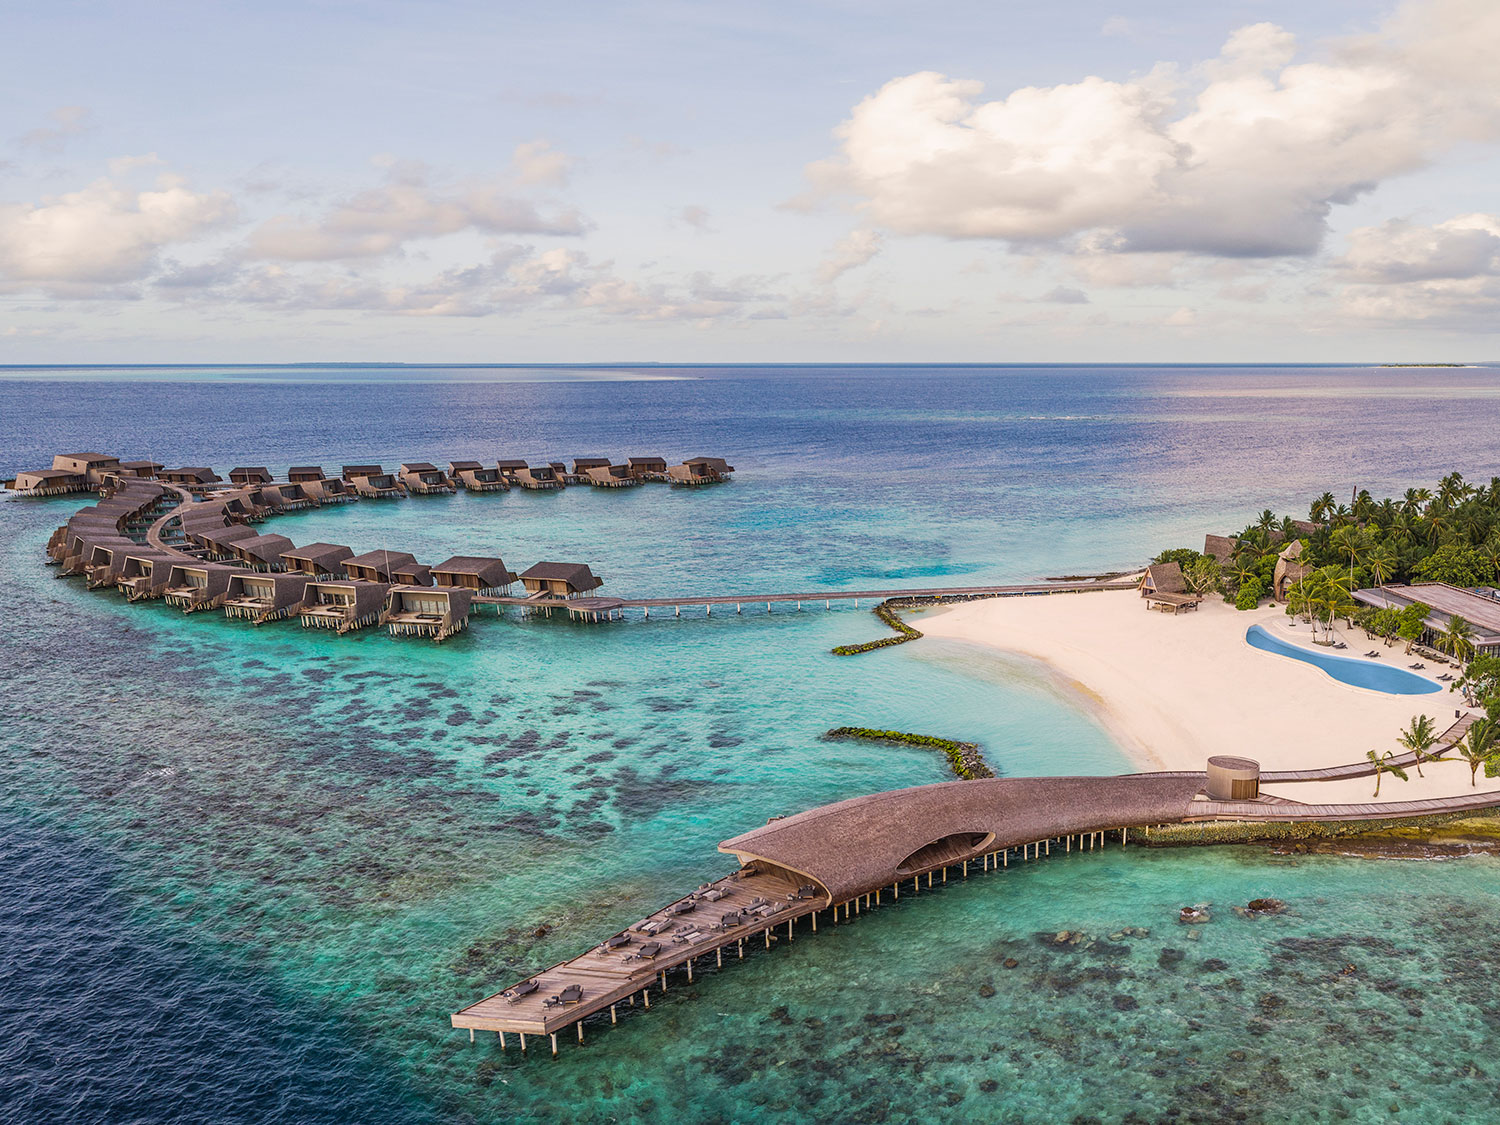 An aerial view of The St. Regis Maldives Vommuli Resort, with overwater bungalows and its iconic Whale Bar.